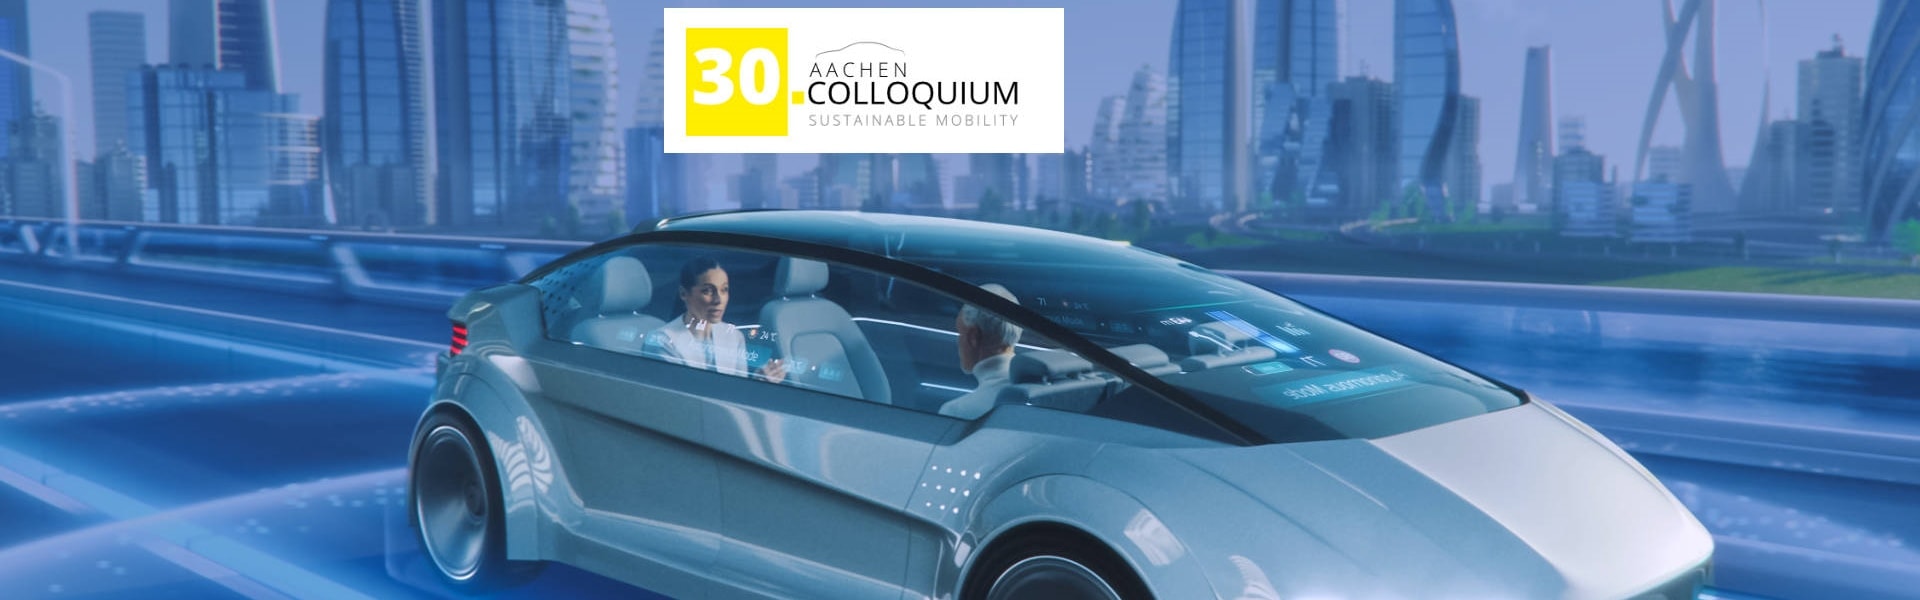 M.TEC at the 30th Aachen Colloquium Sustainable Mobility